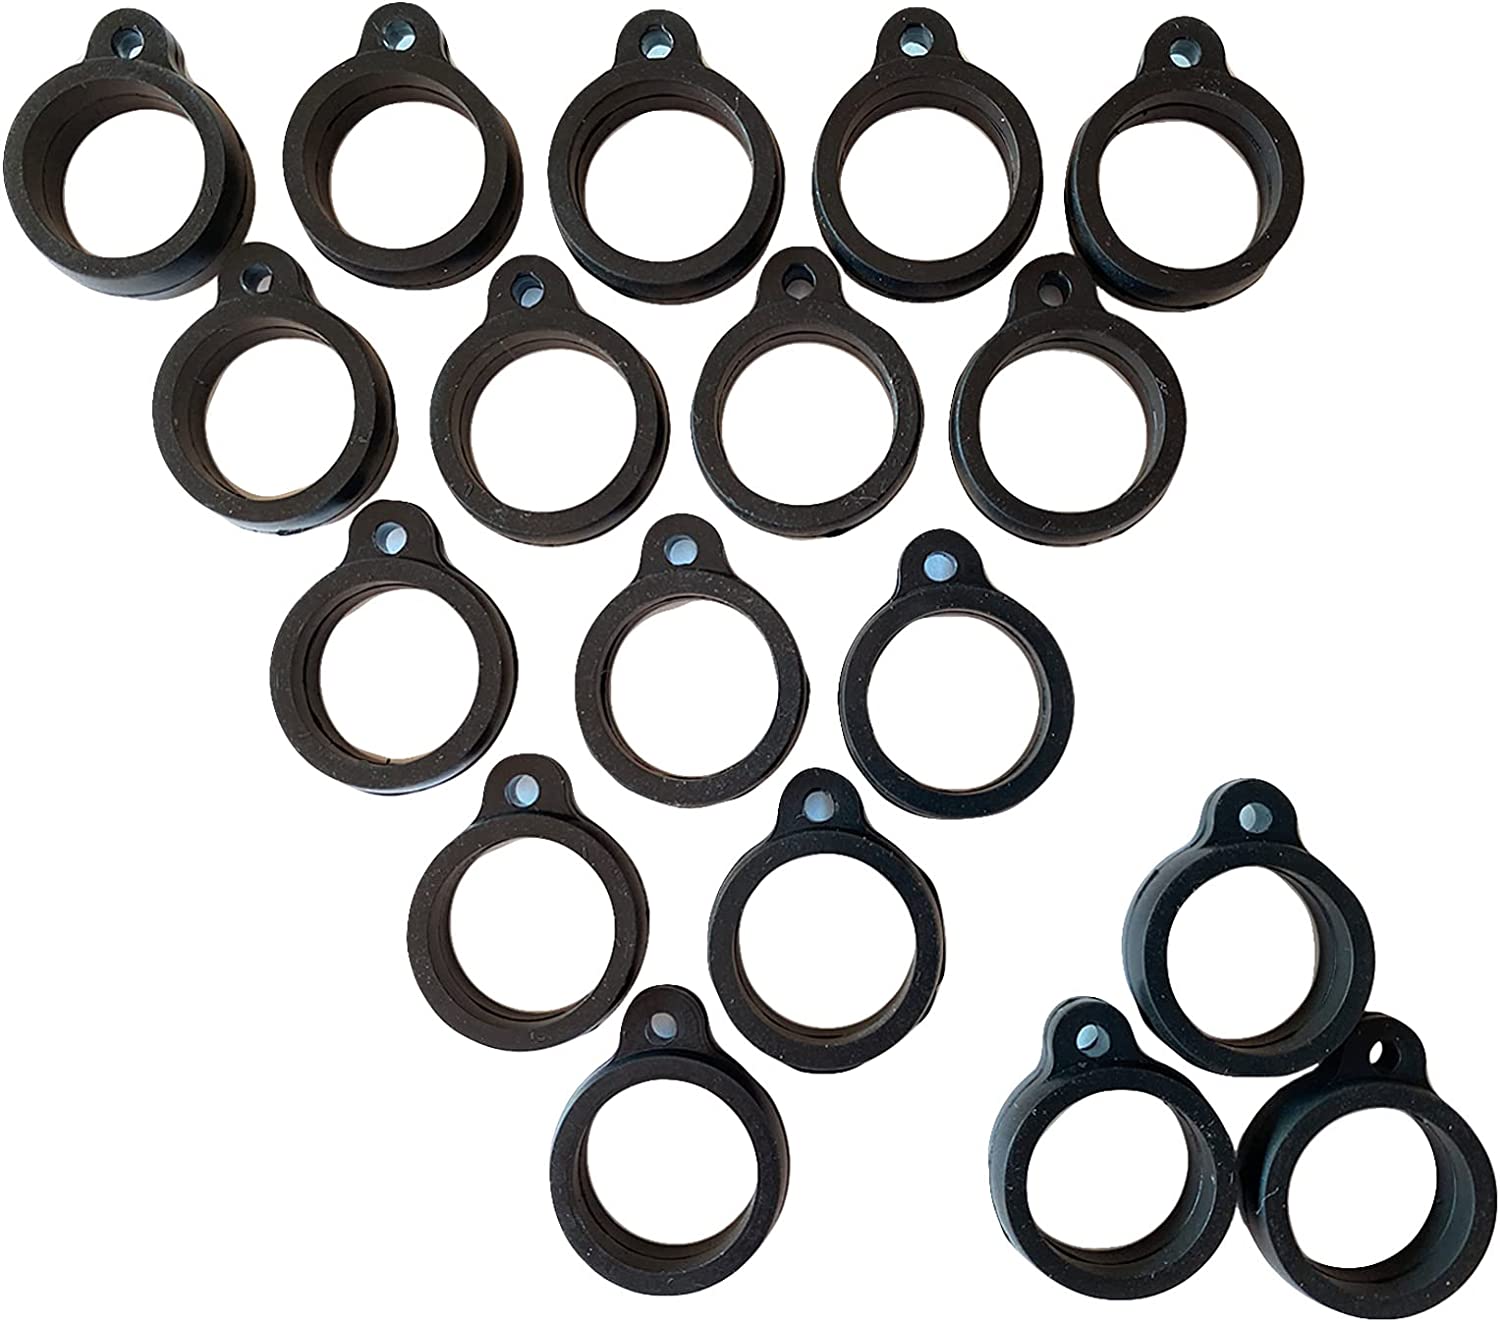 Silicone Bands - CENGLORY 10 Pieces Silicone Anti Skid Rings Rubber Bands  -18mm Silicone Bands